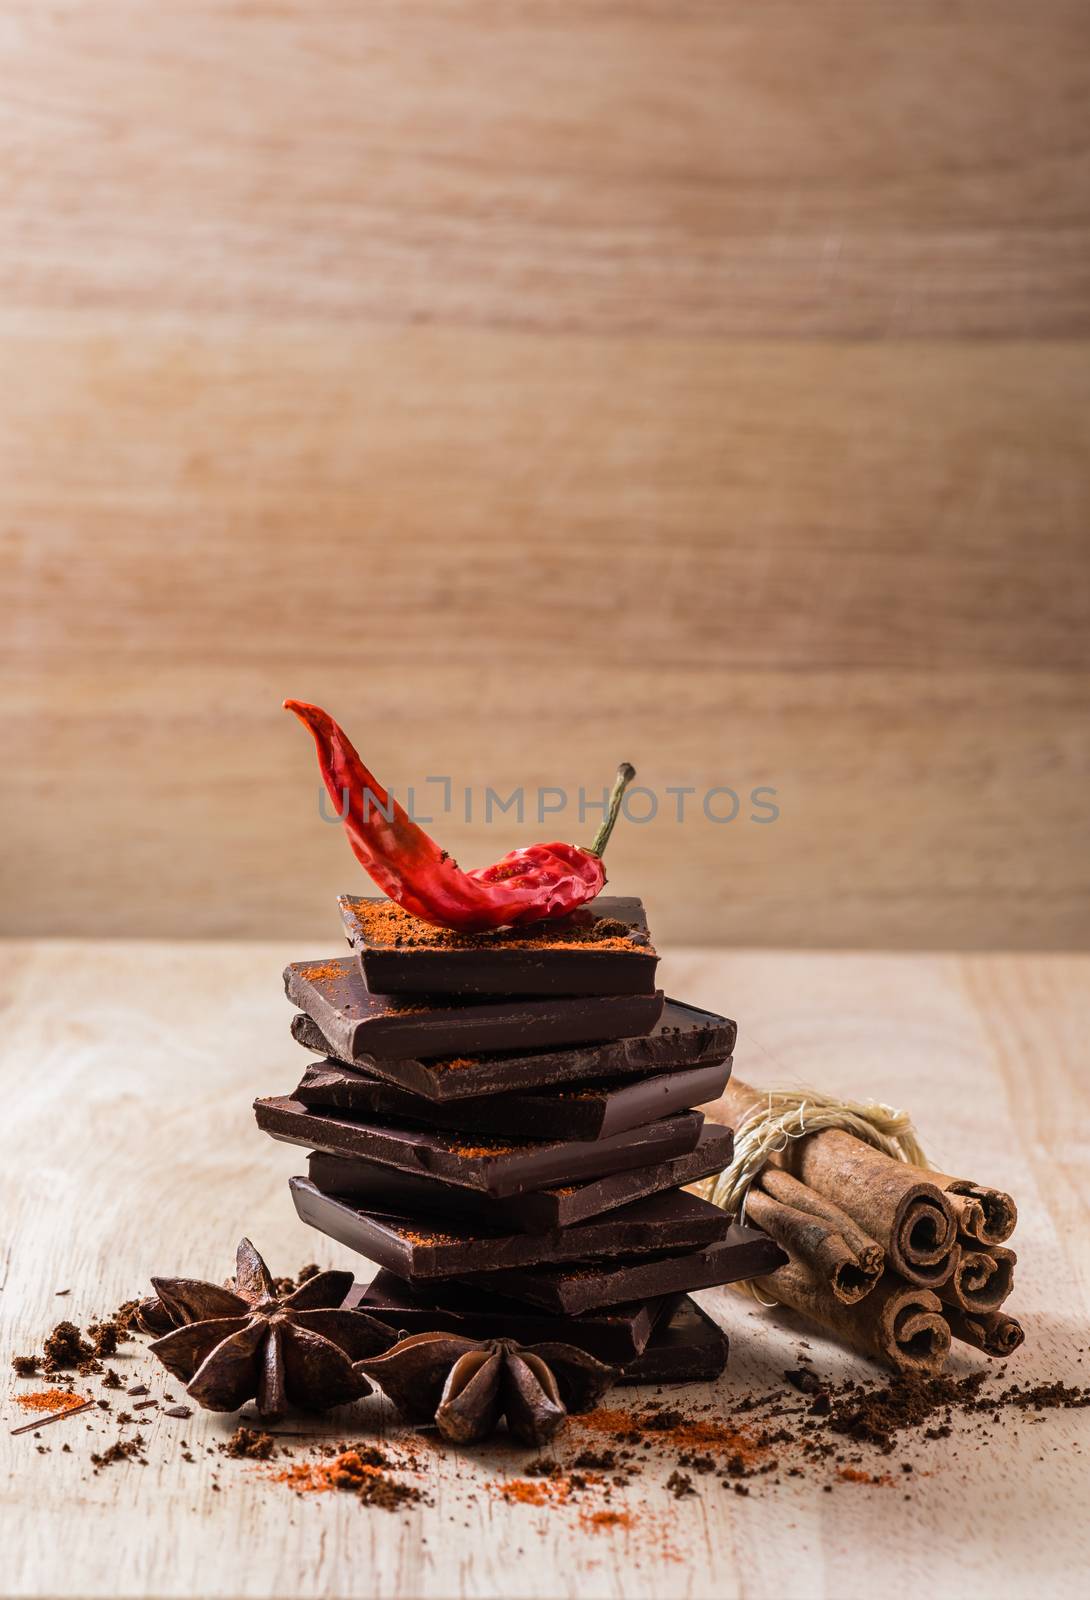 Chocolate and Condiment Still Life. Copy space in the top of image.